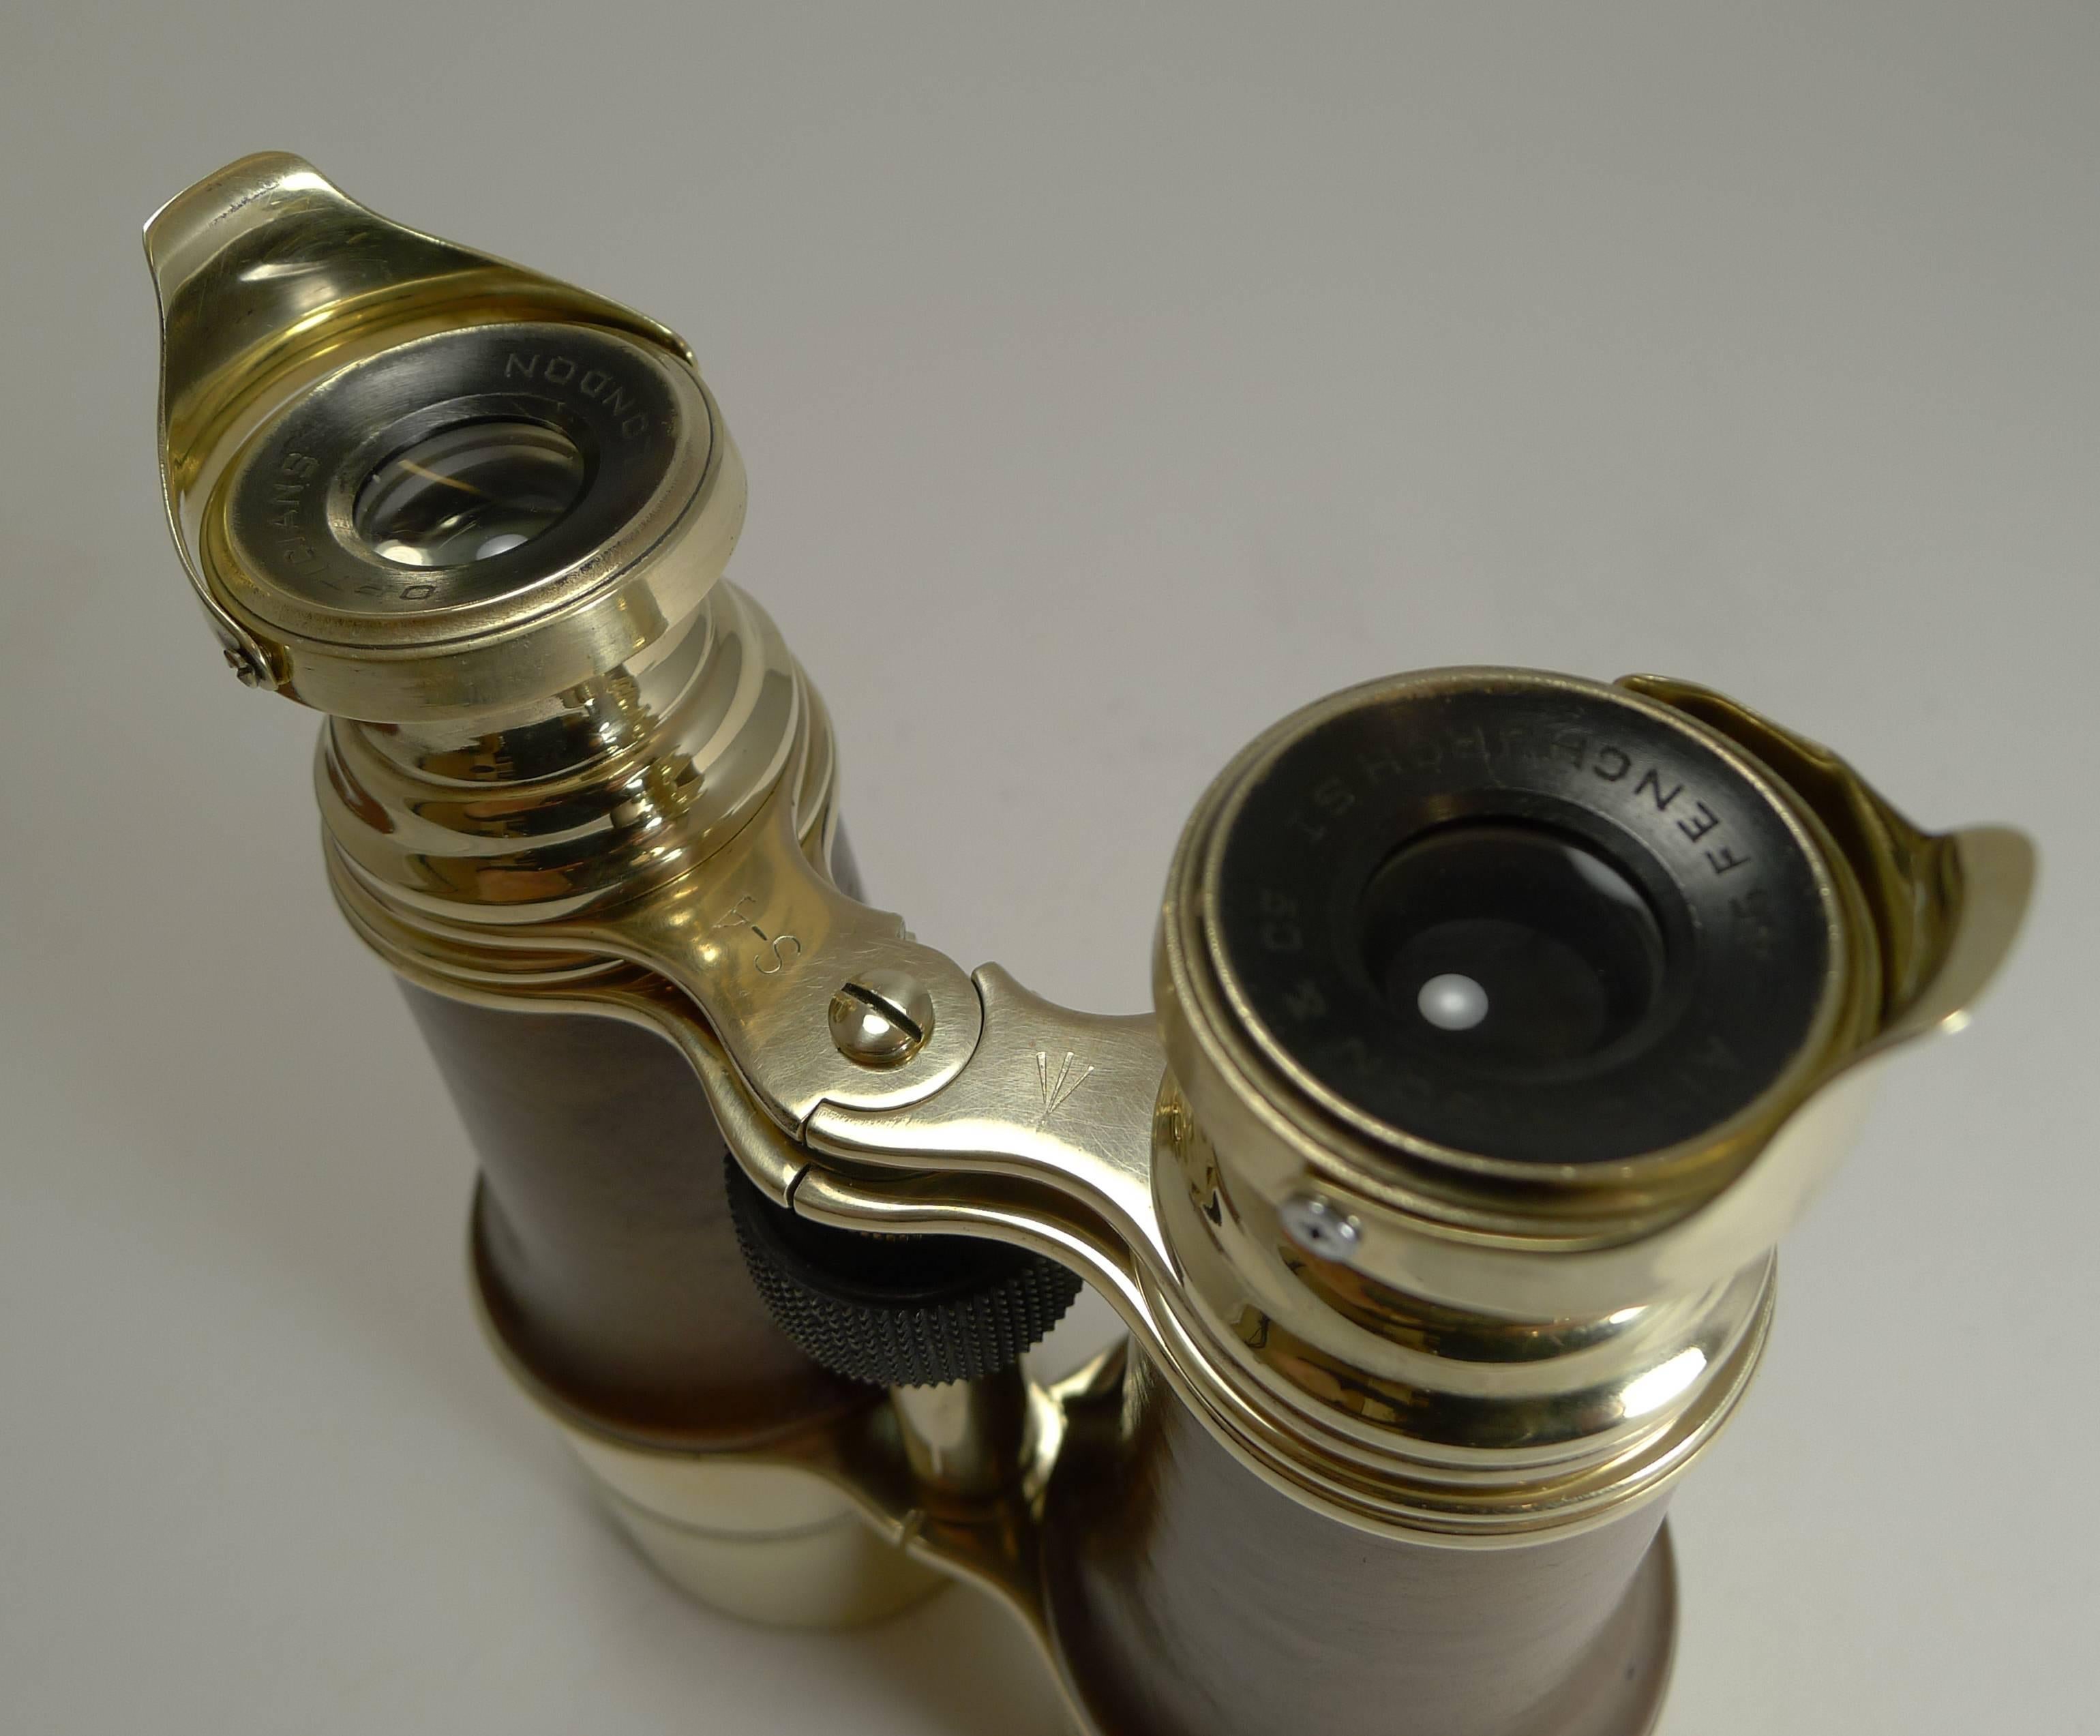 Pair of WWI Binoculars and Case, British Officer's Issue, 1918, Signed 1